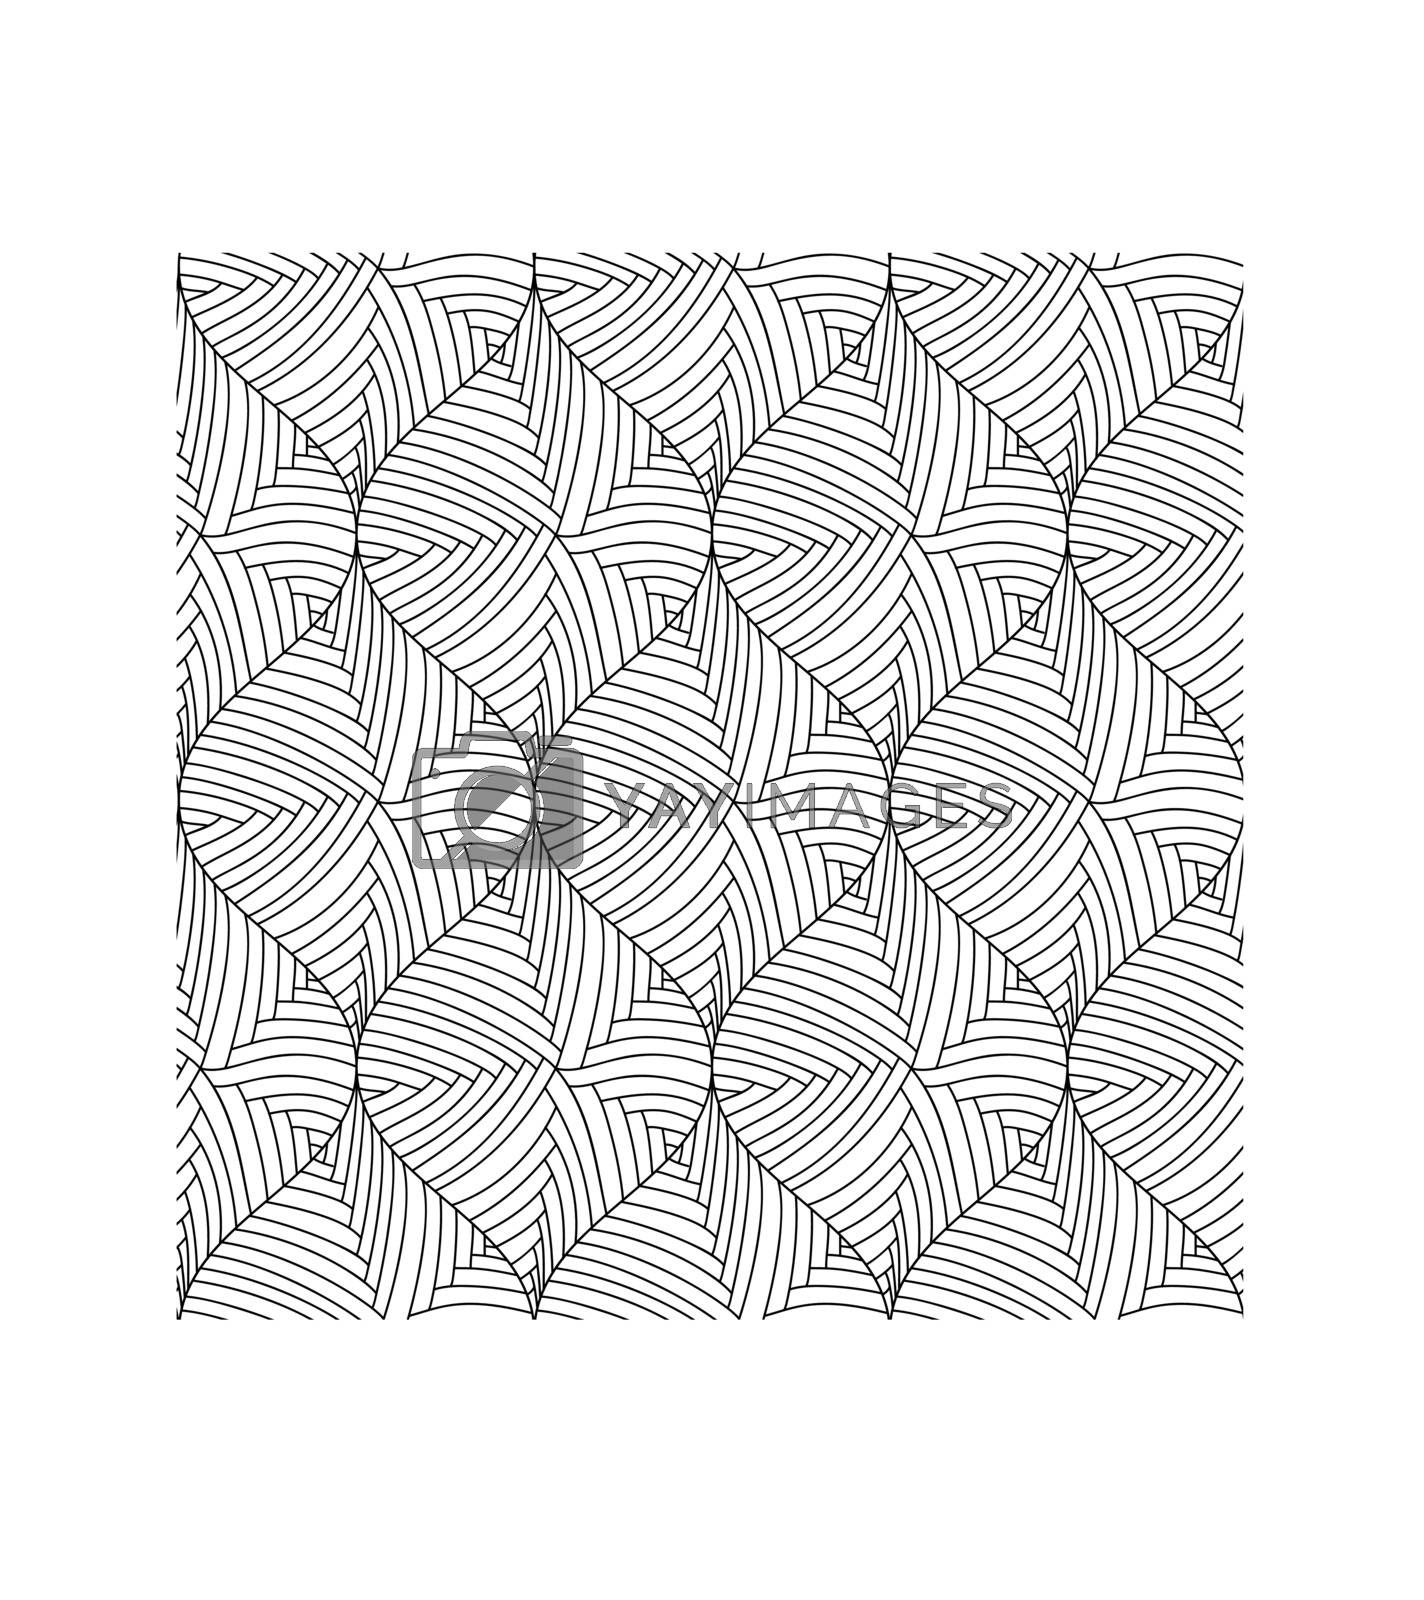 Royalty free image of Vector monochrome decorative elements seamless pattern. by narinbg